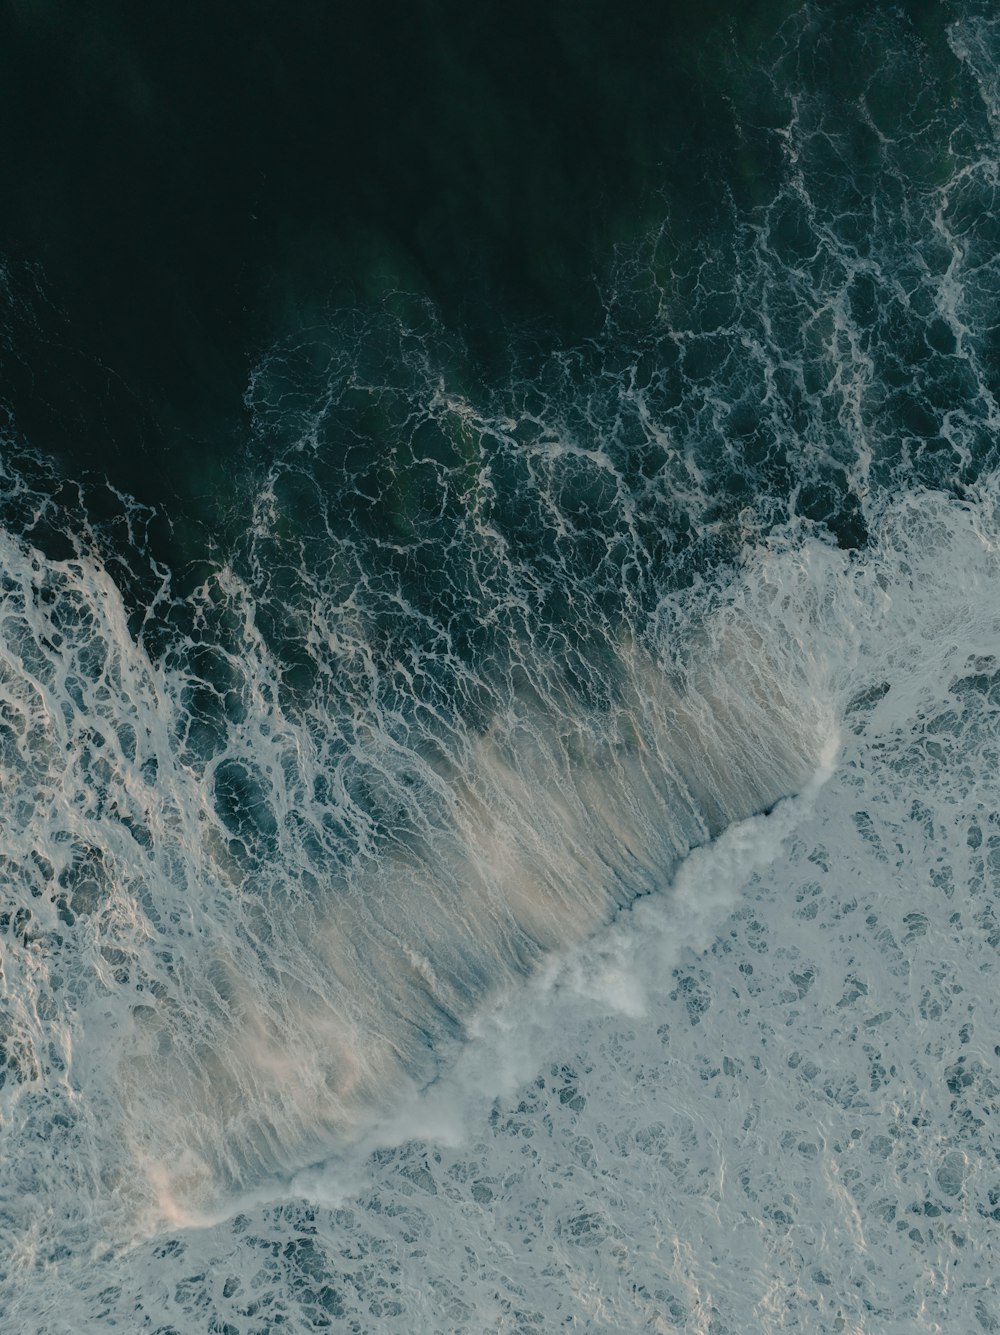 a wave in the ocean